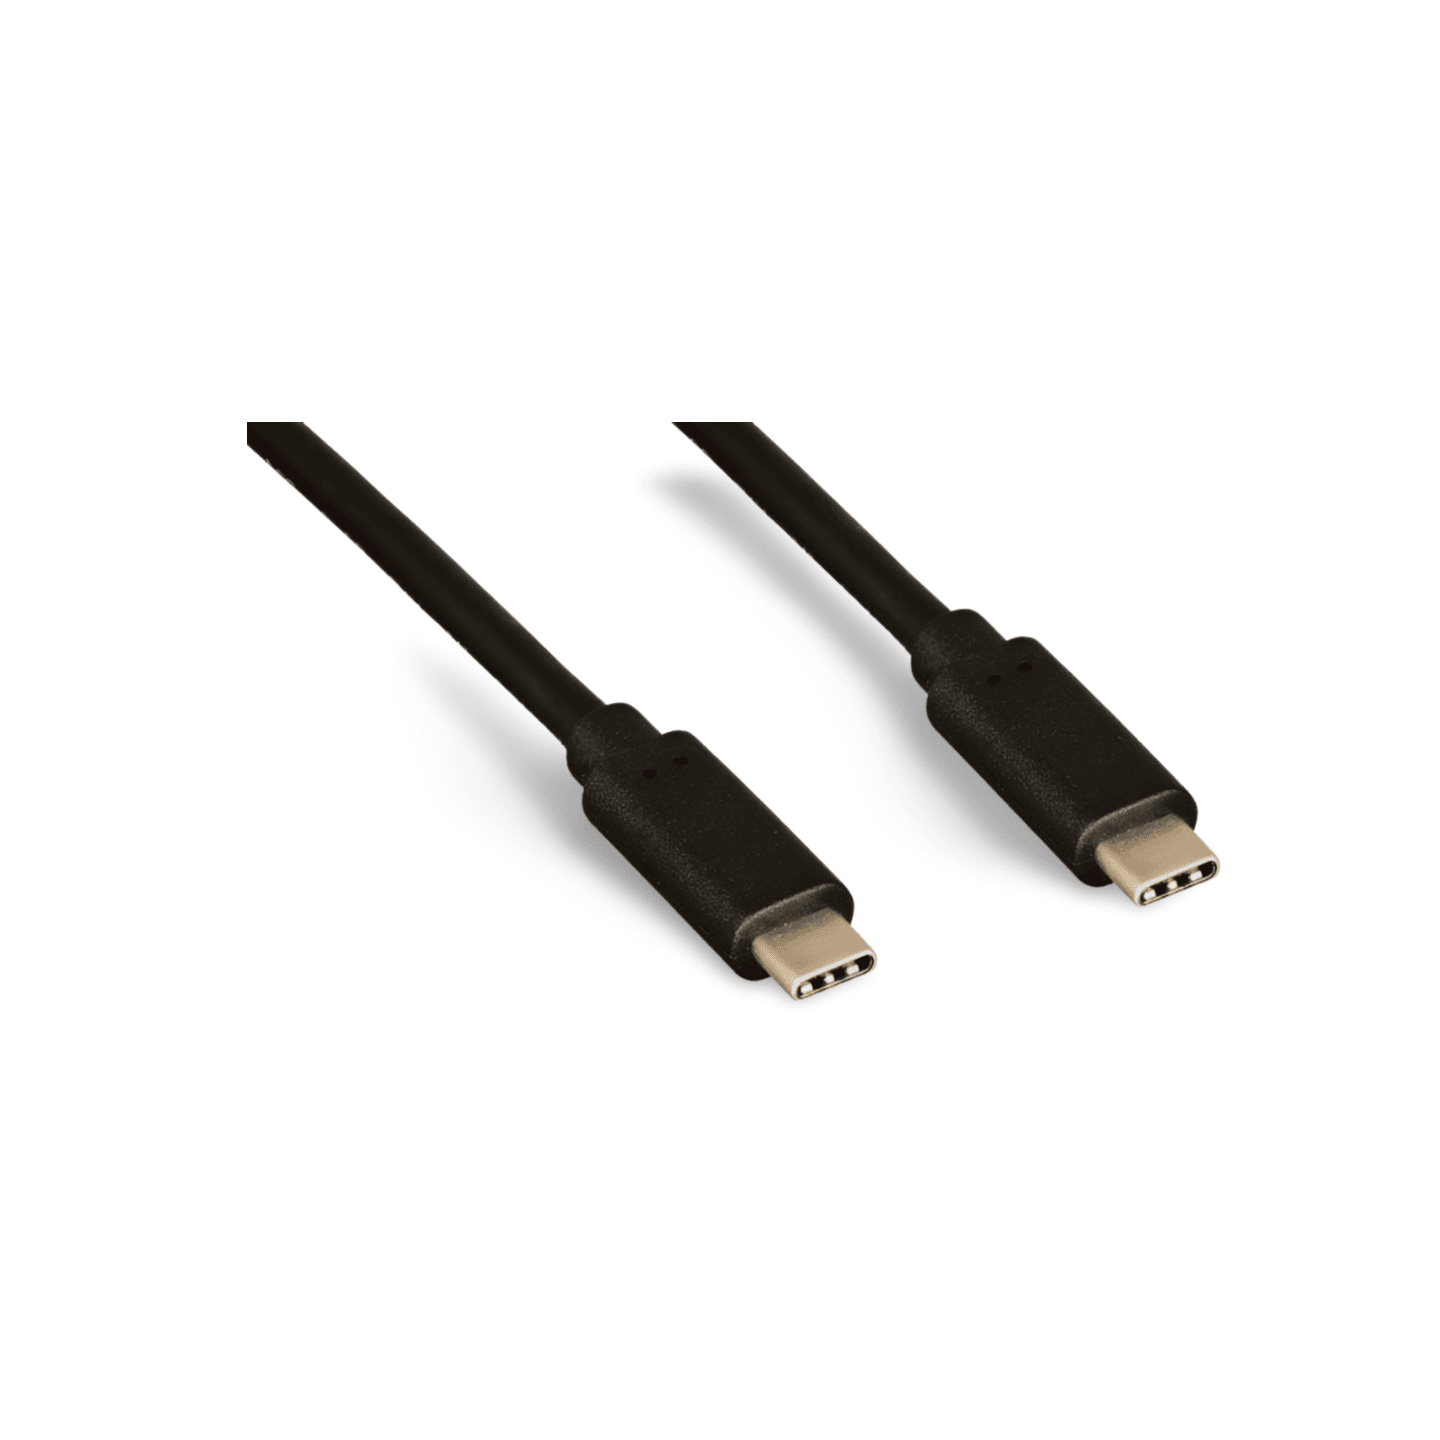 3 4ft USB 3.1 SuperSpeed Type C to Type C Cable GEN2 EMarker black